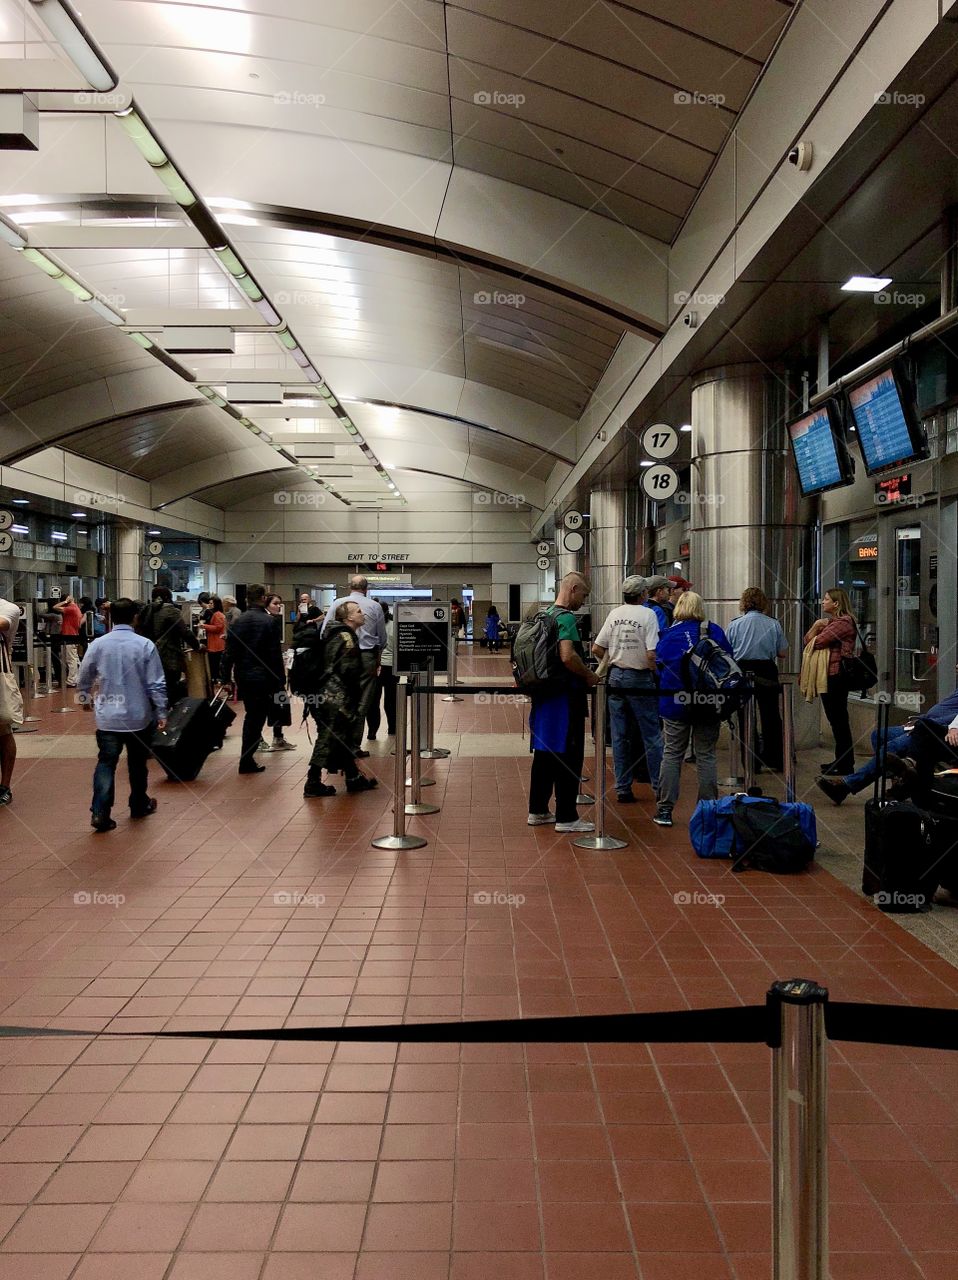 Travelers hustling and bustling through the concourse at South Station Bus Terminal in Boston, MA, while several passengers line up with their luggage to board a bus to adventures unknown.